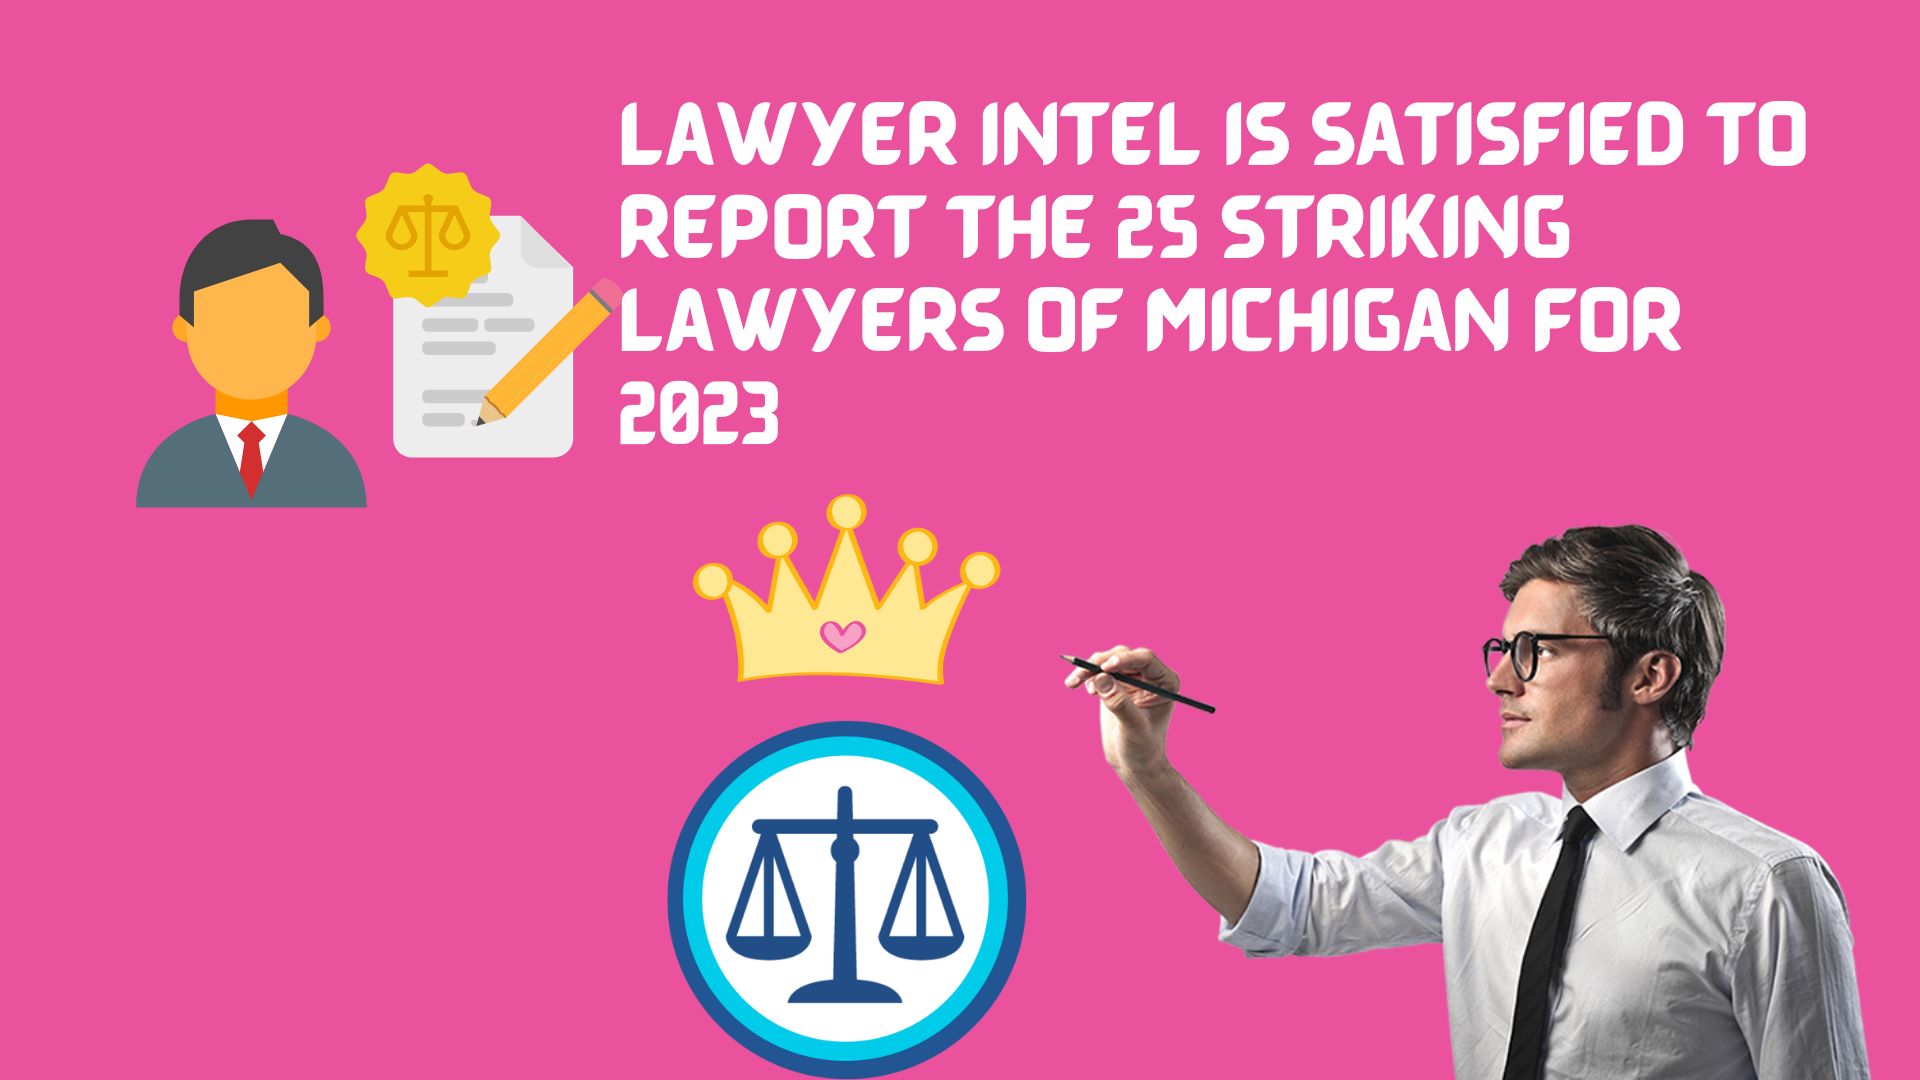 Lawyer intel is satisfied to report the 25 striking lawyers of michigan for 2023